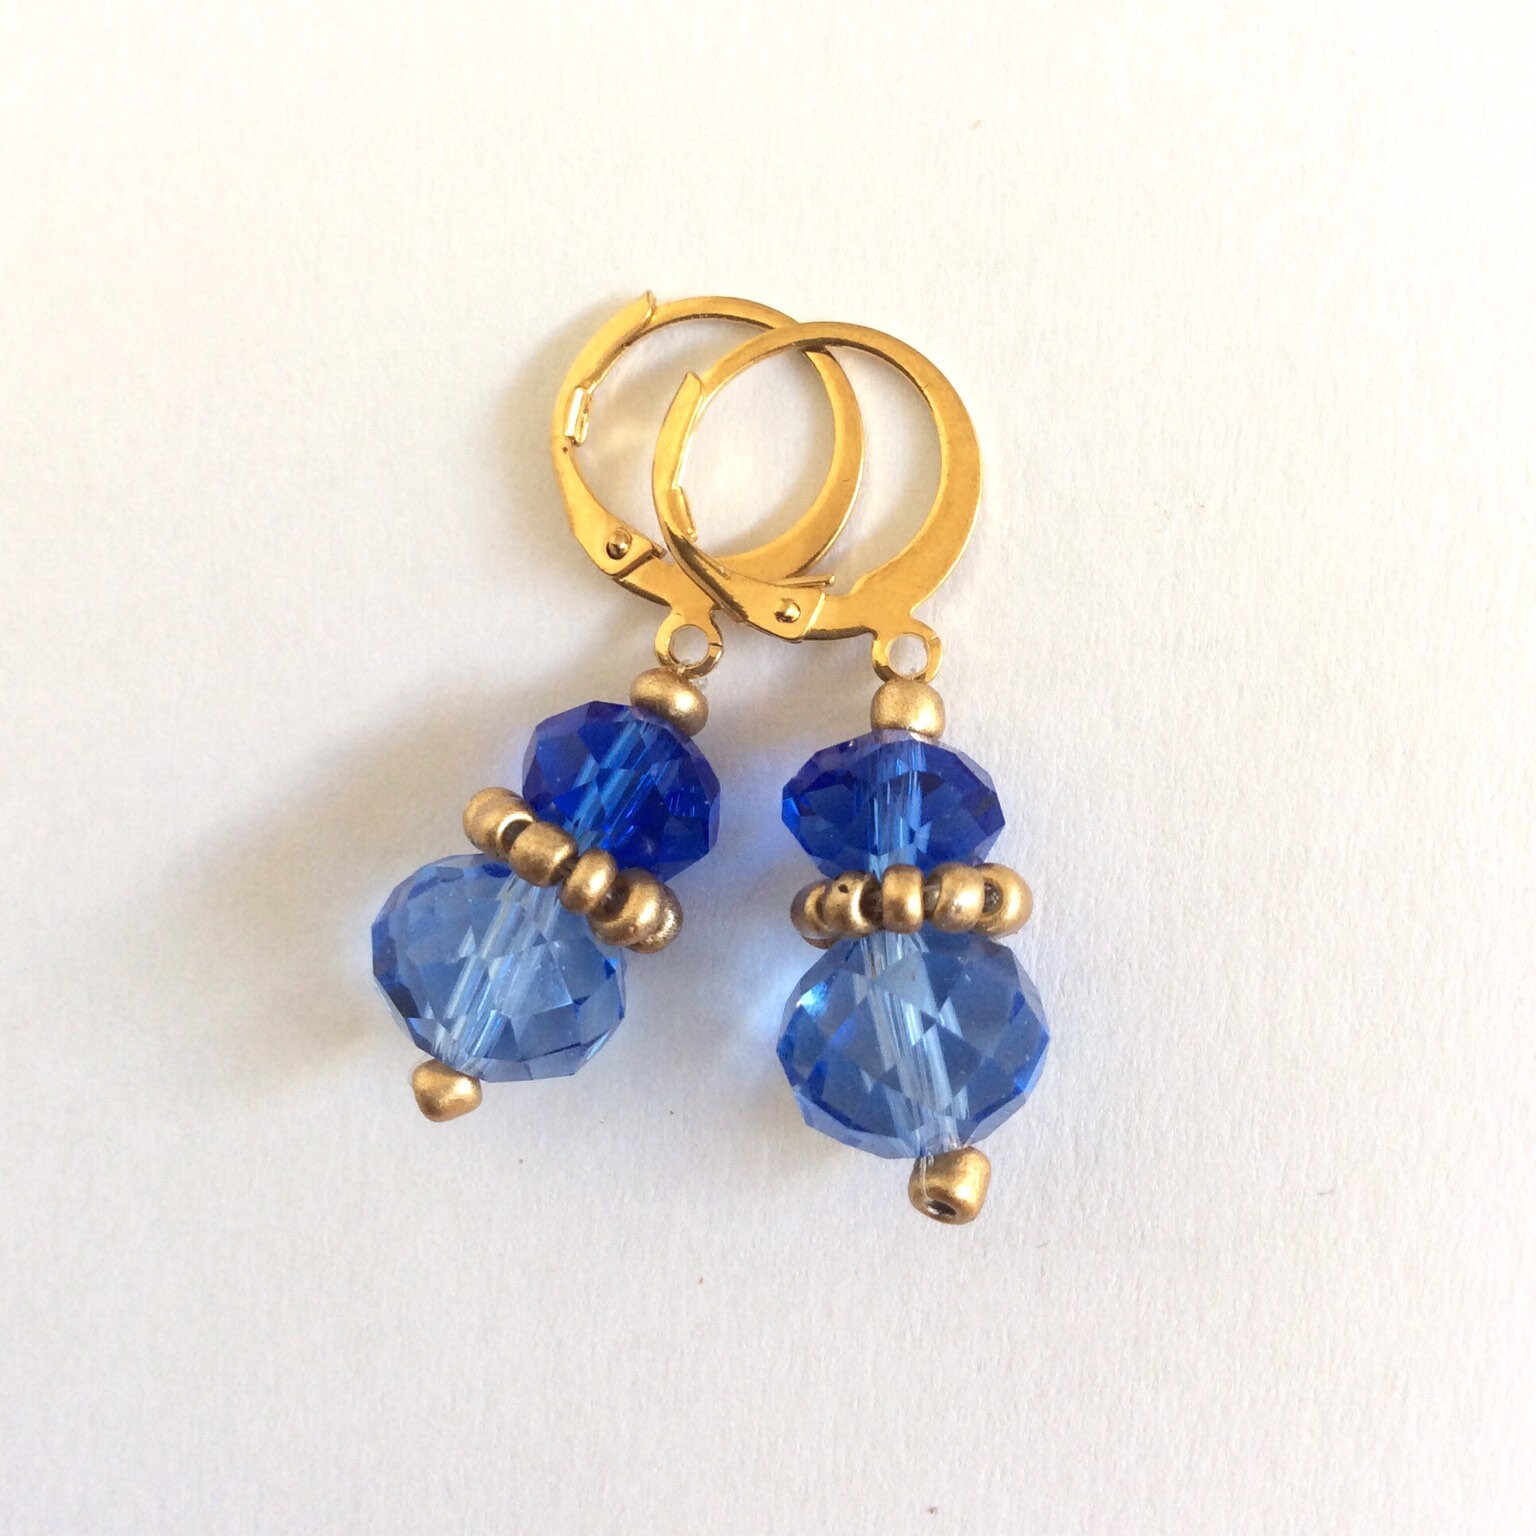 Blue Dangle Earrings Made of Shiny Glass Beads and Gold Plated - Etsy